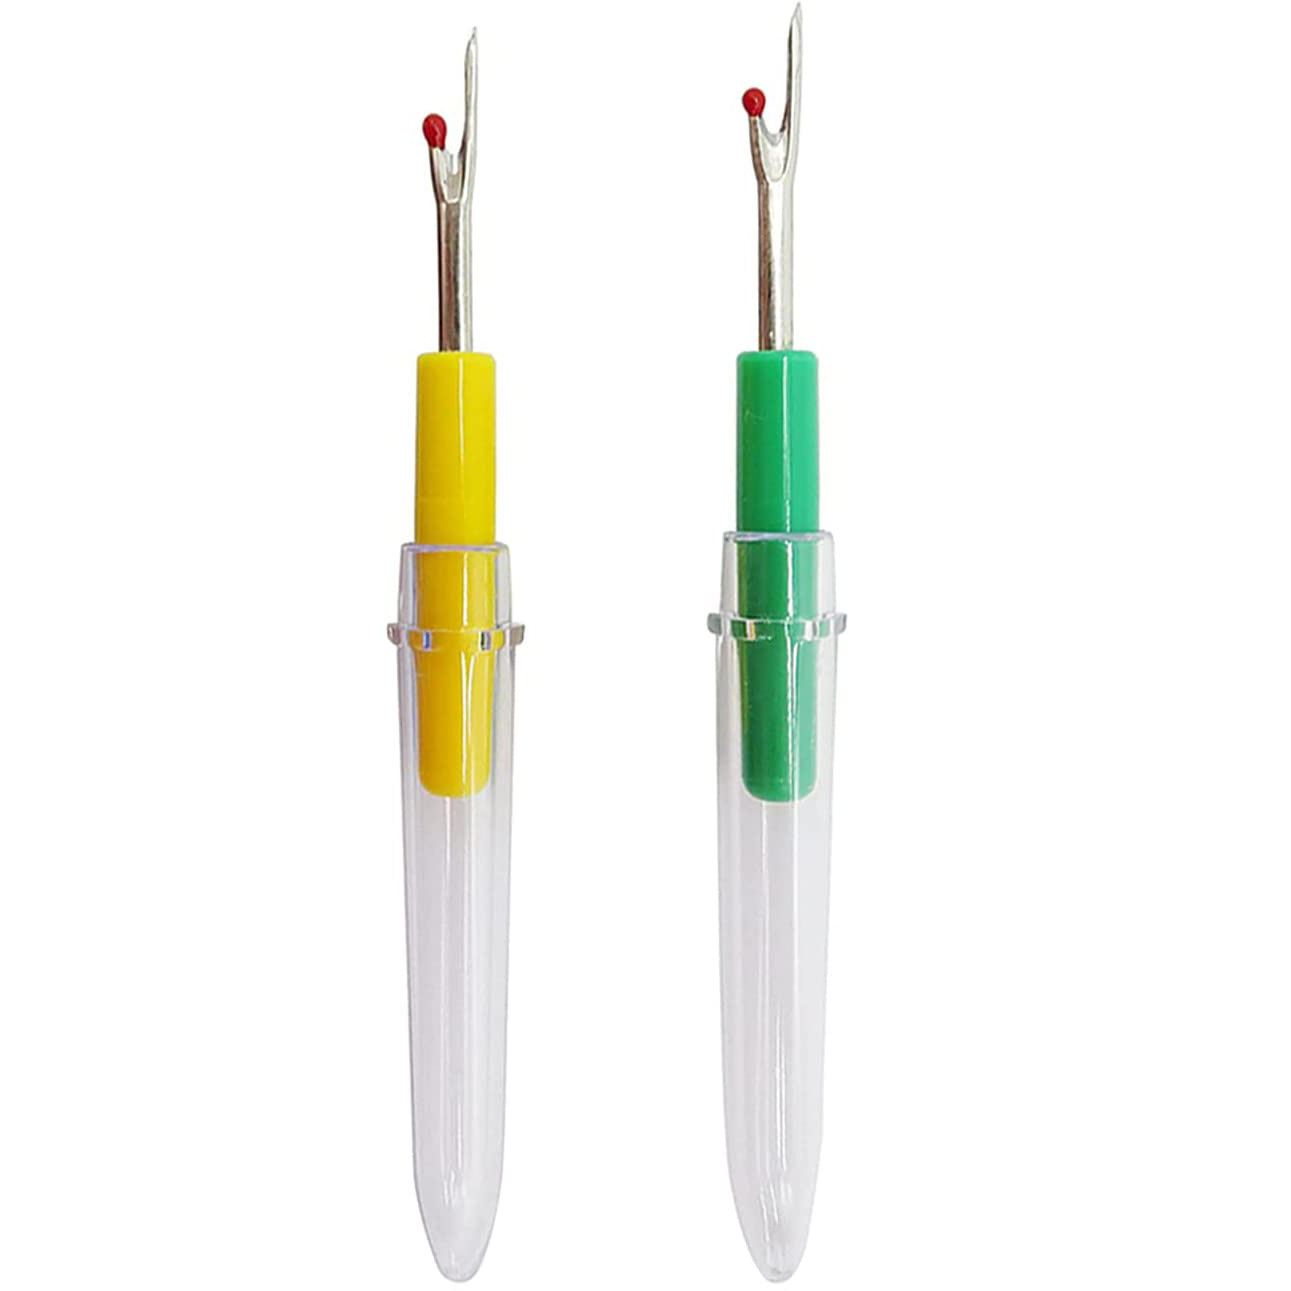 2PCS Sewing Products Seam Rippers for Sewing Seam Ripper and Thread Remover